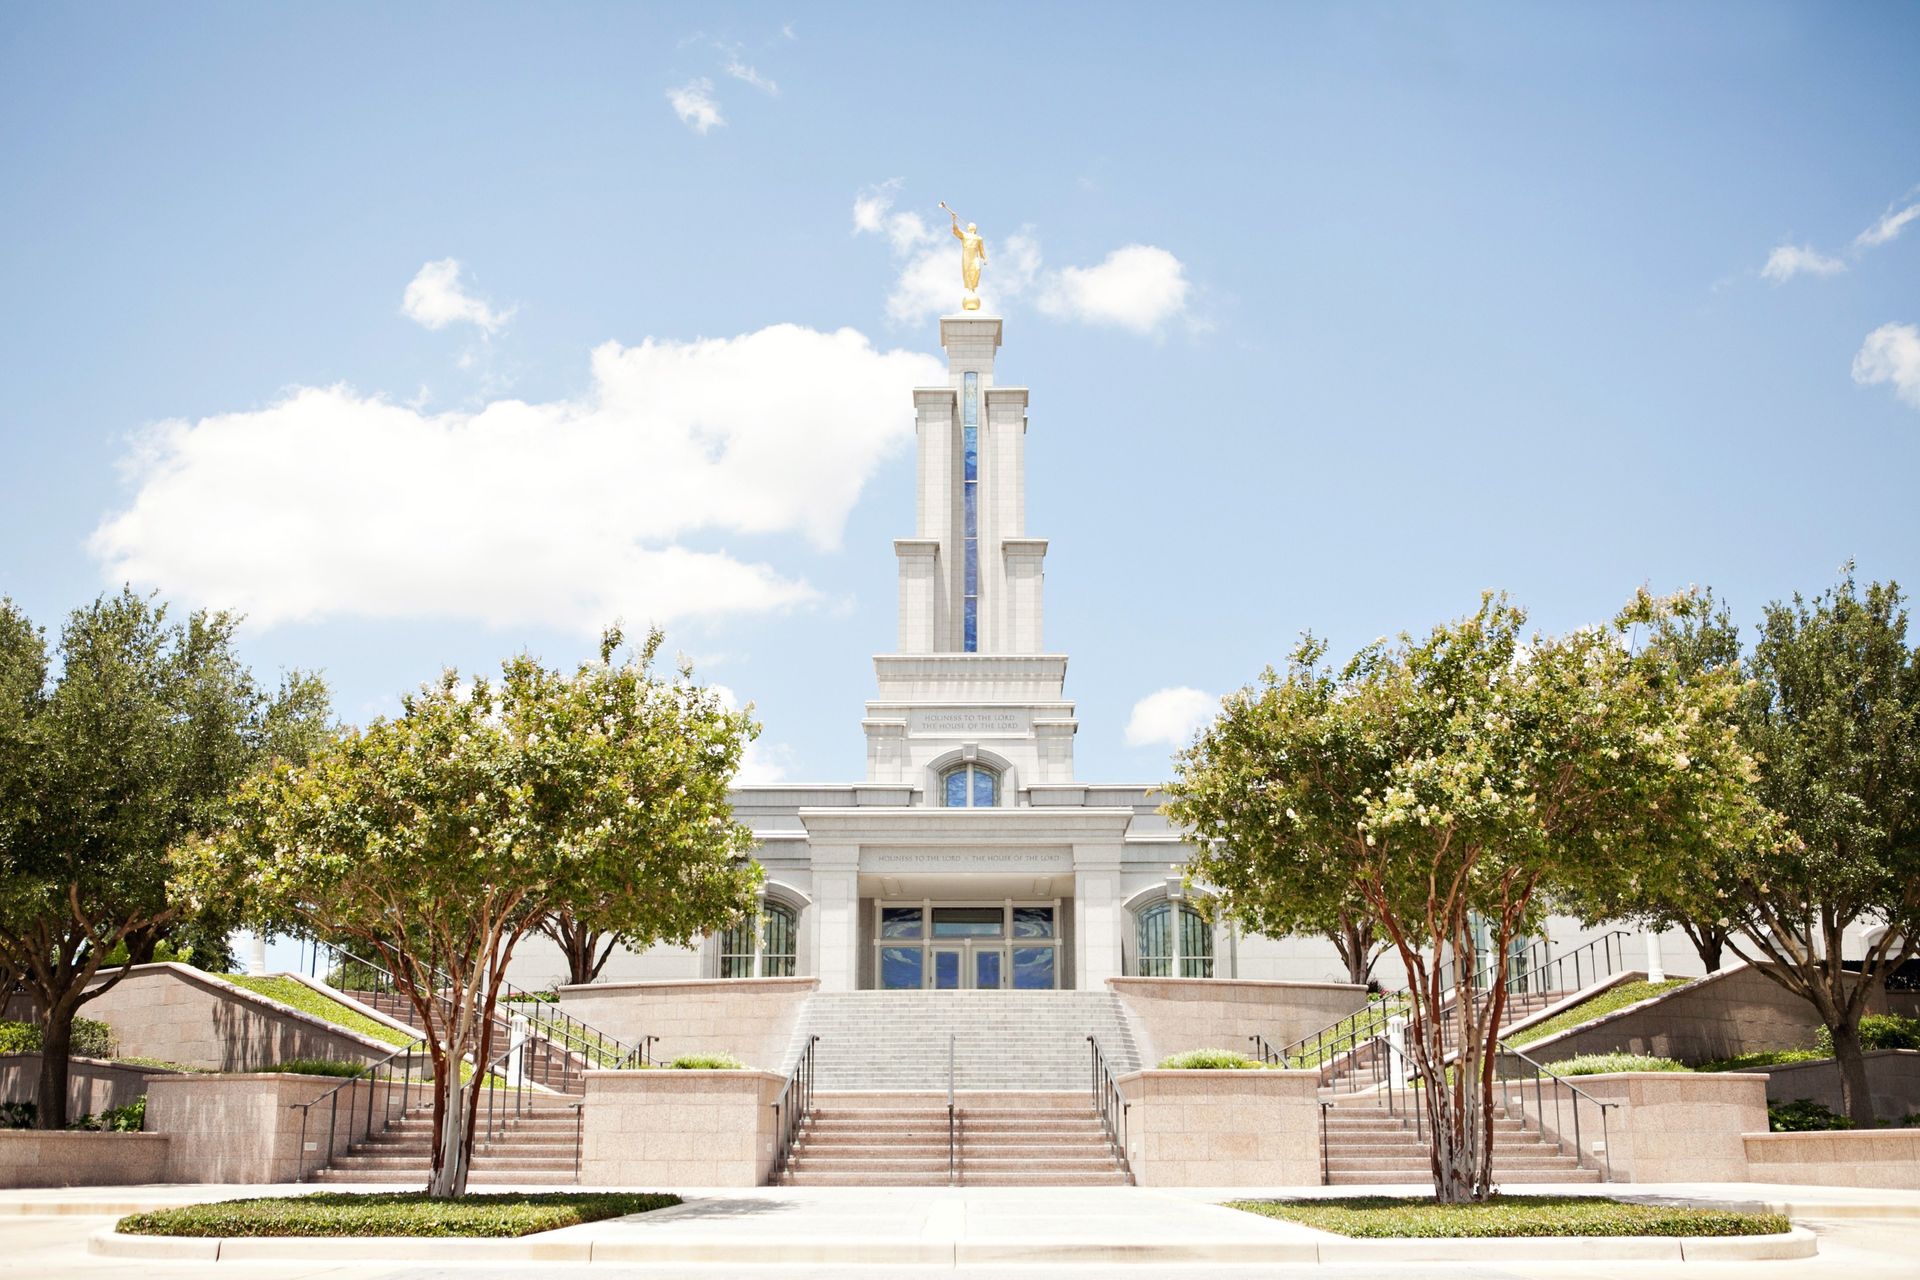 The San Antonio Texas Temple, including the entrance and scenery.